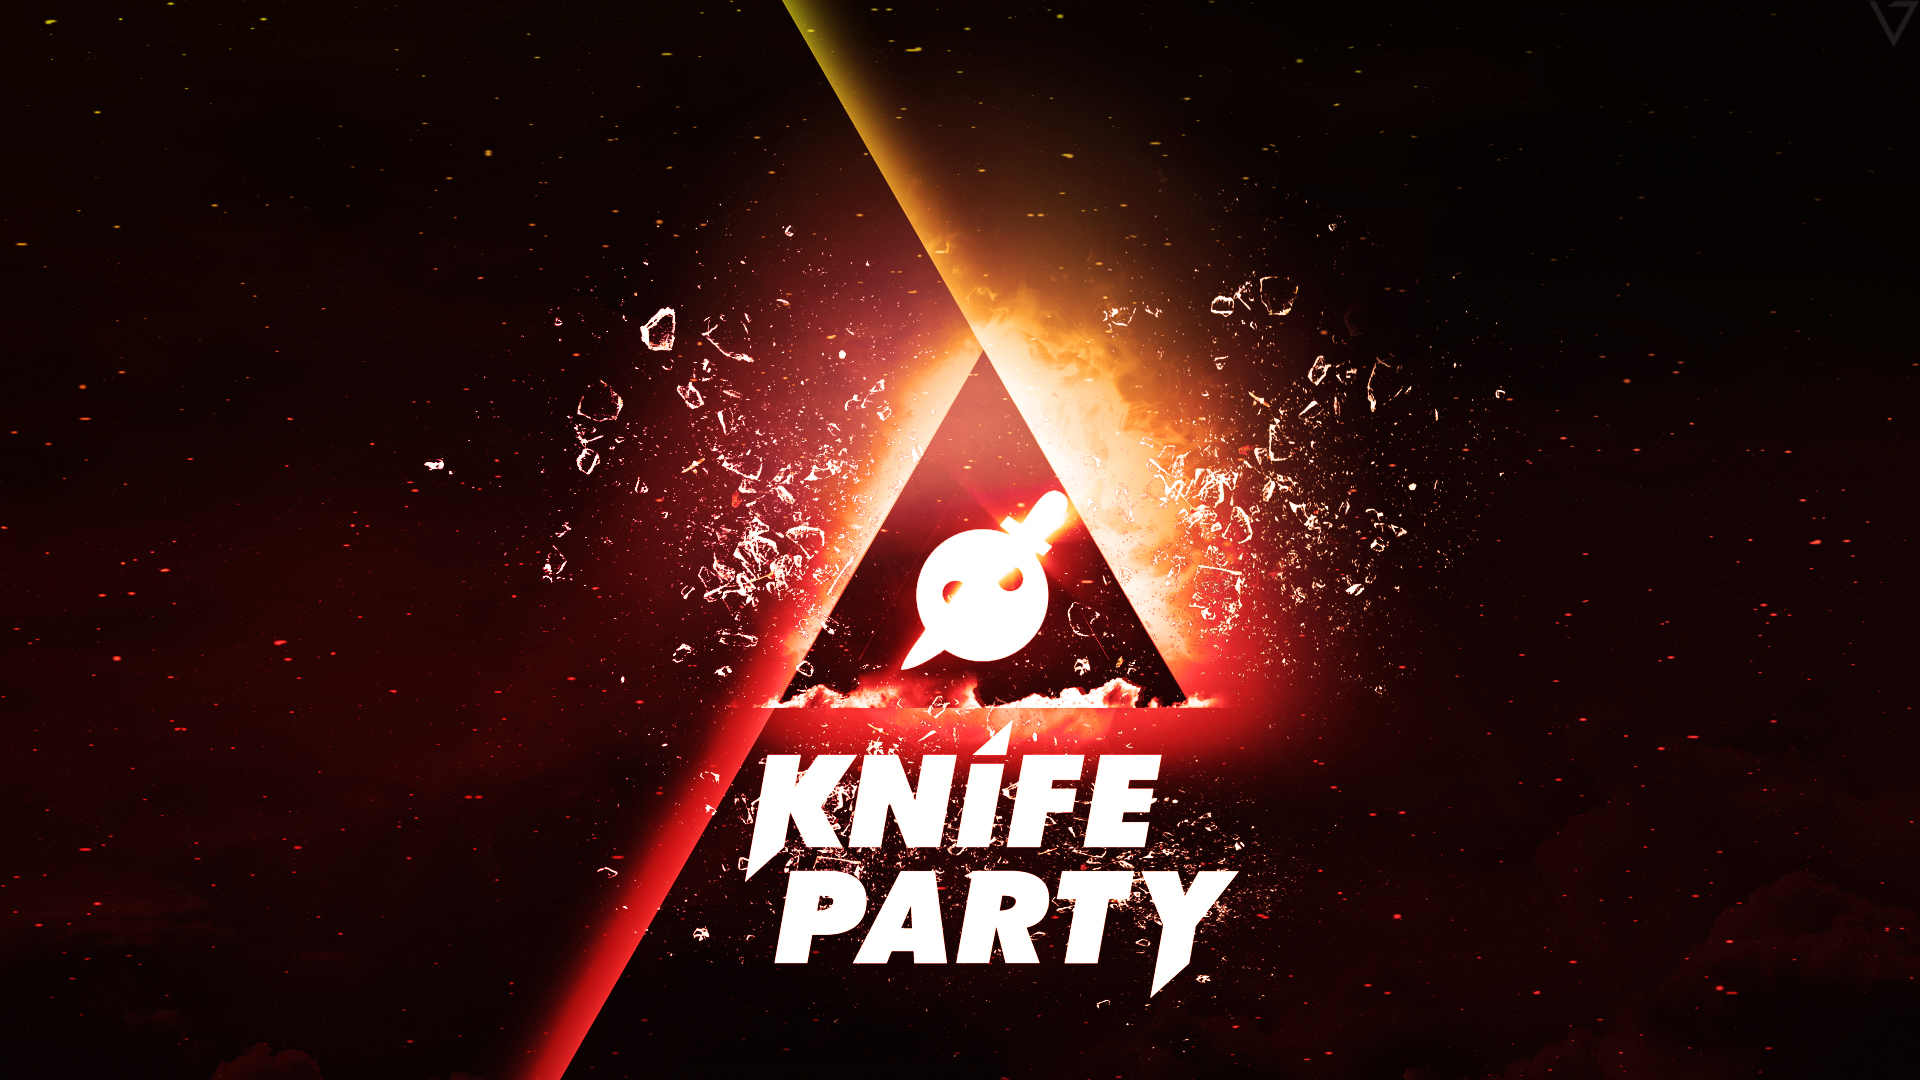 Knife Party Wallpaper